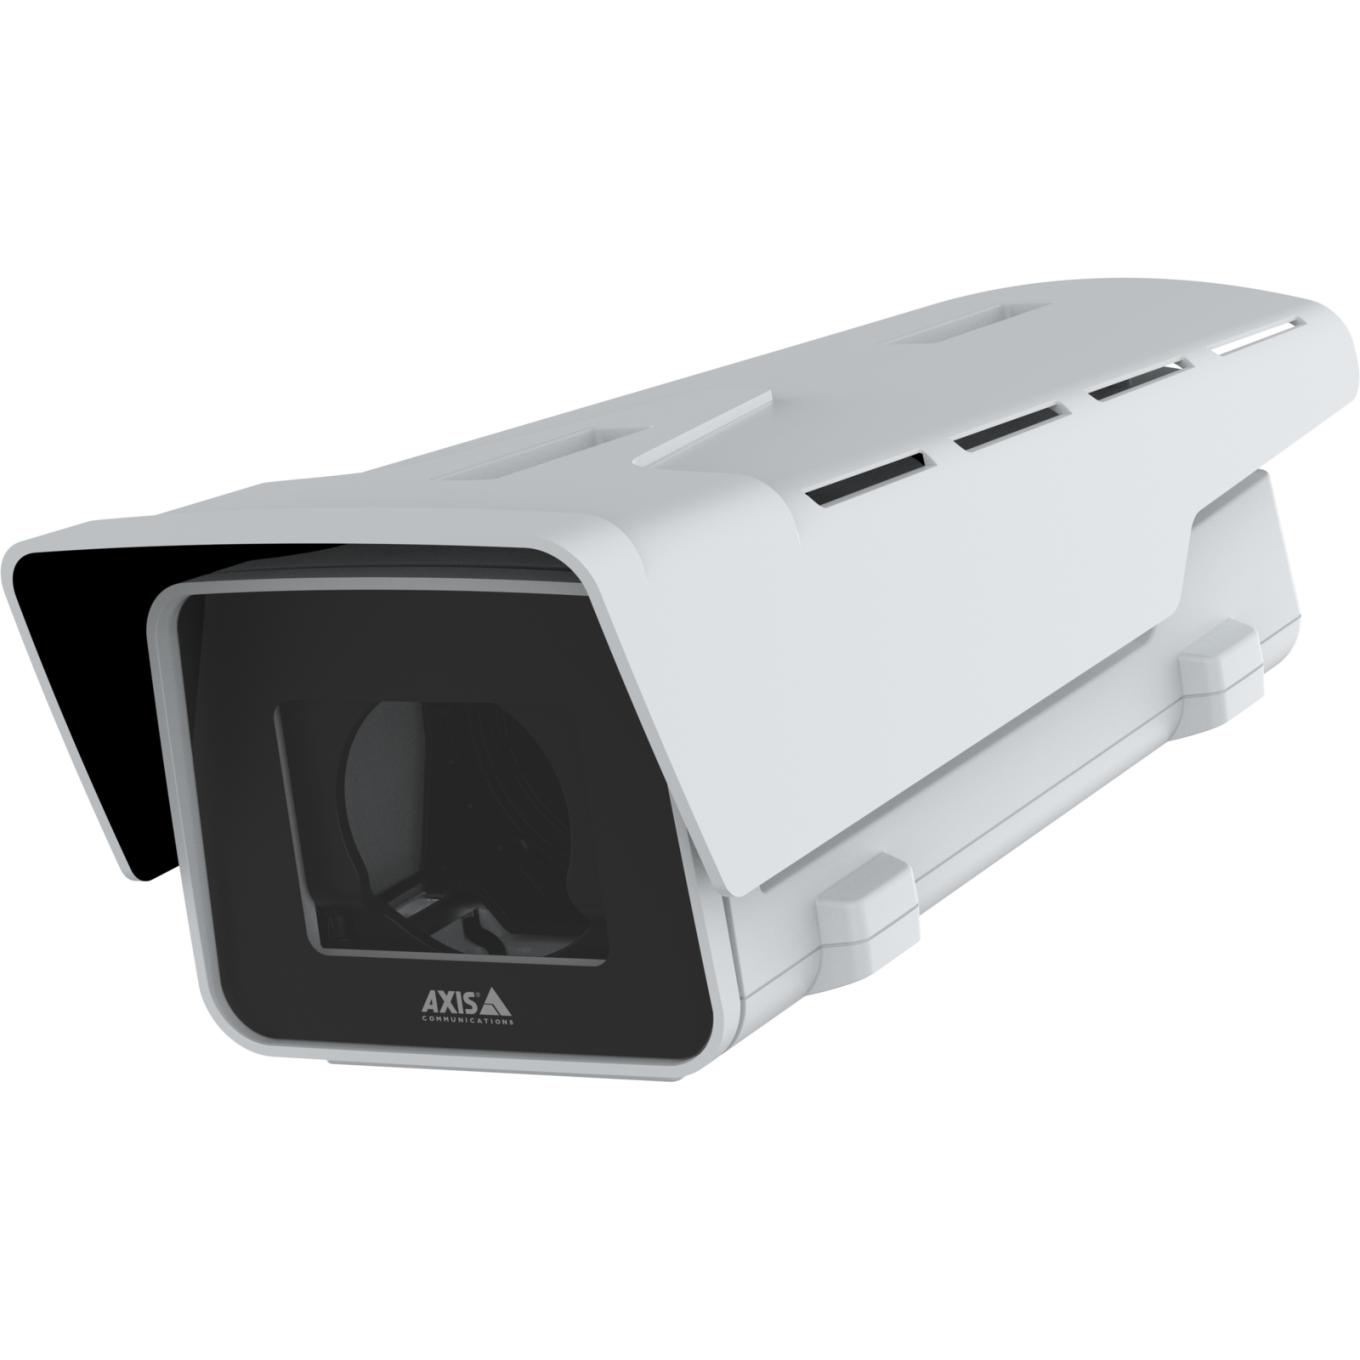 AXIS P1388-BE Box Camera | Axis Communications